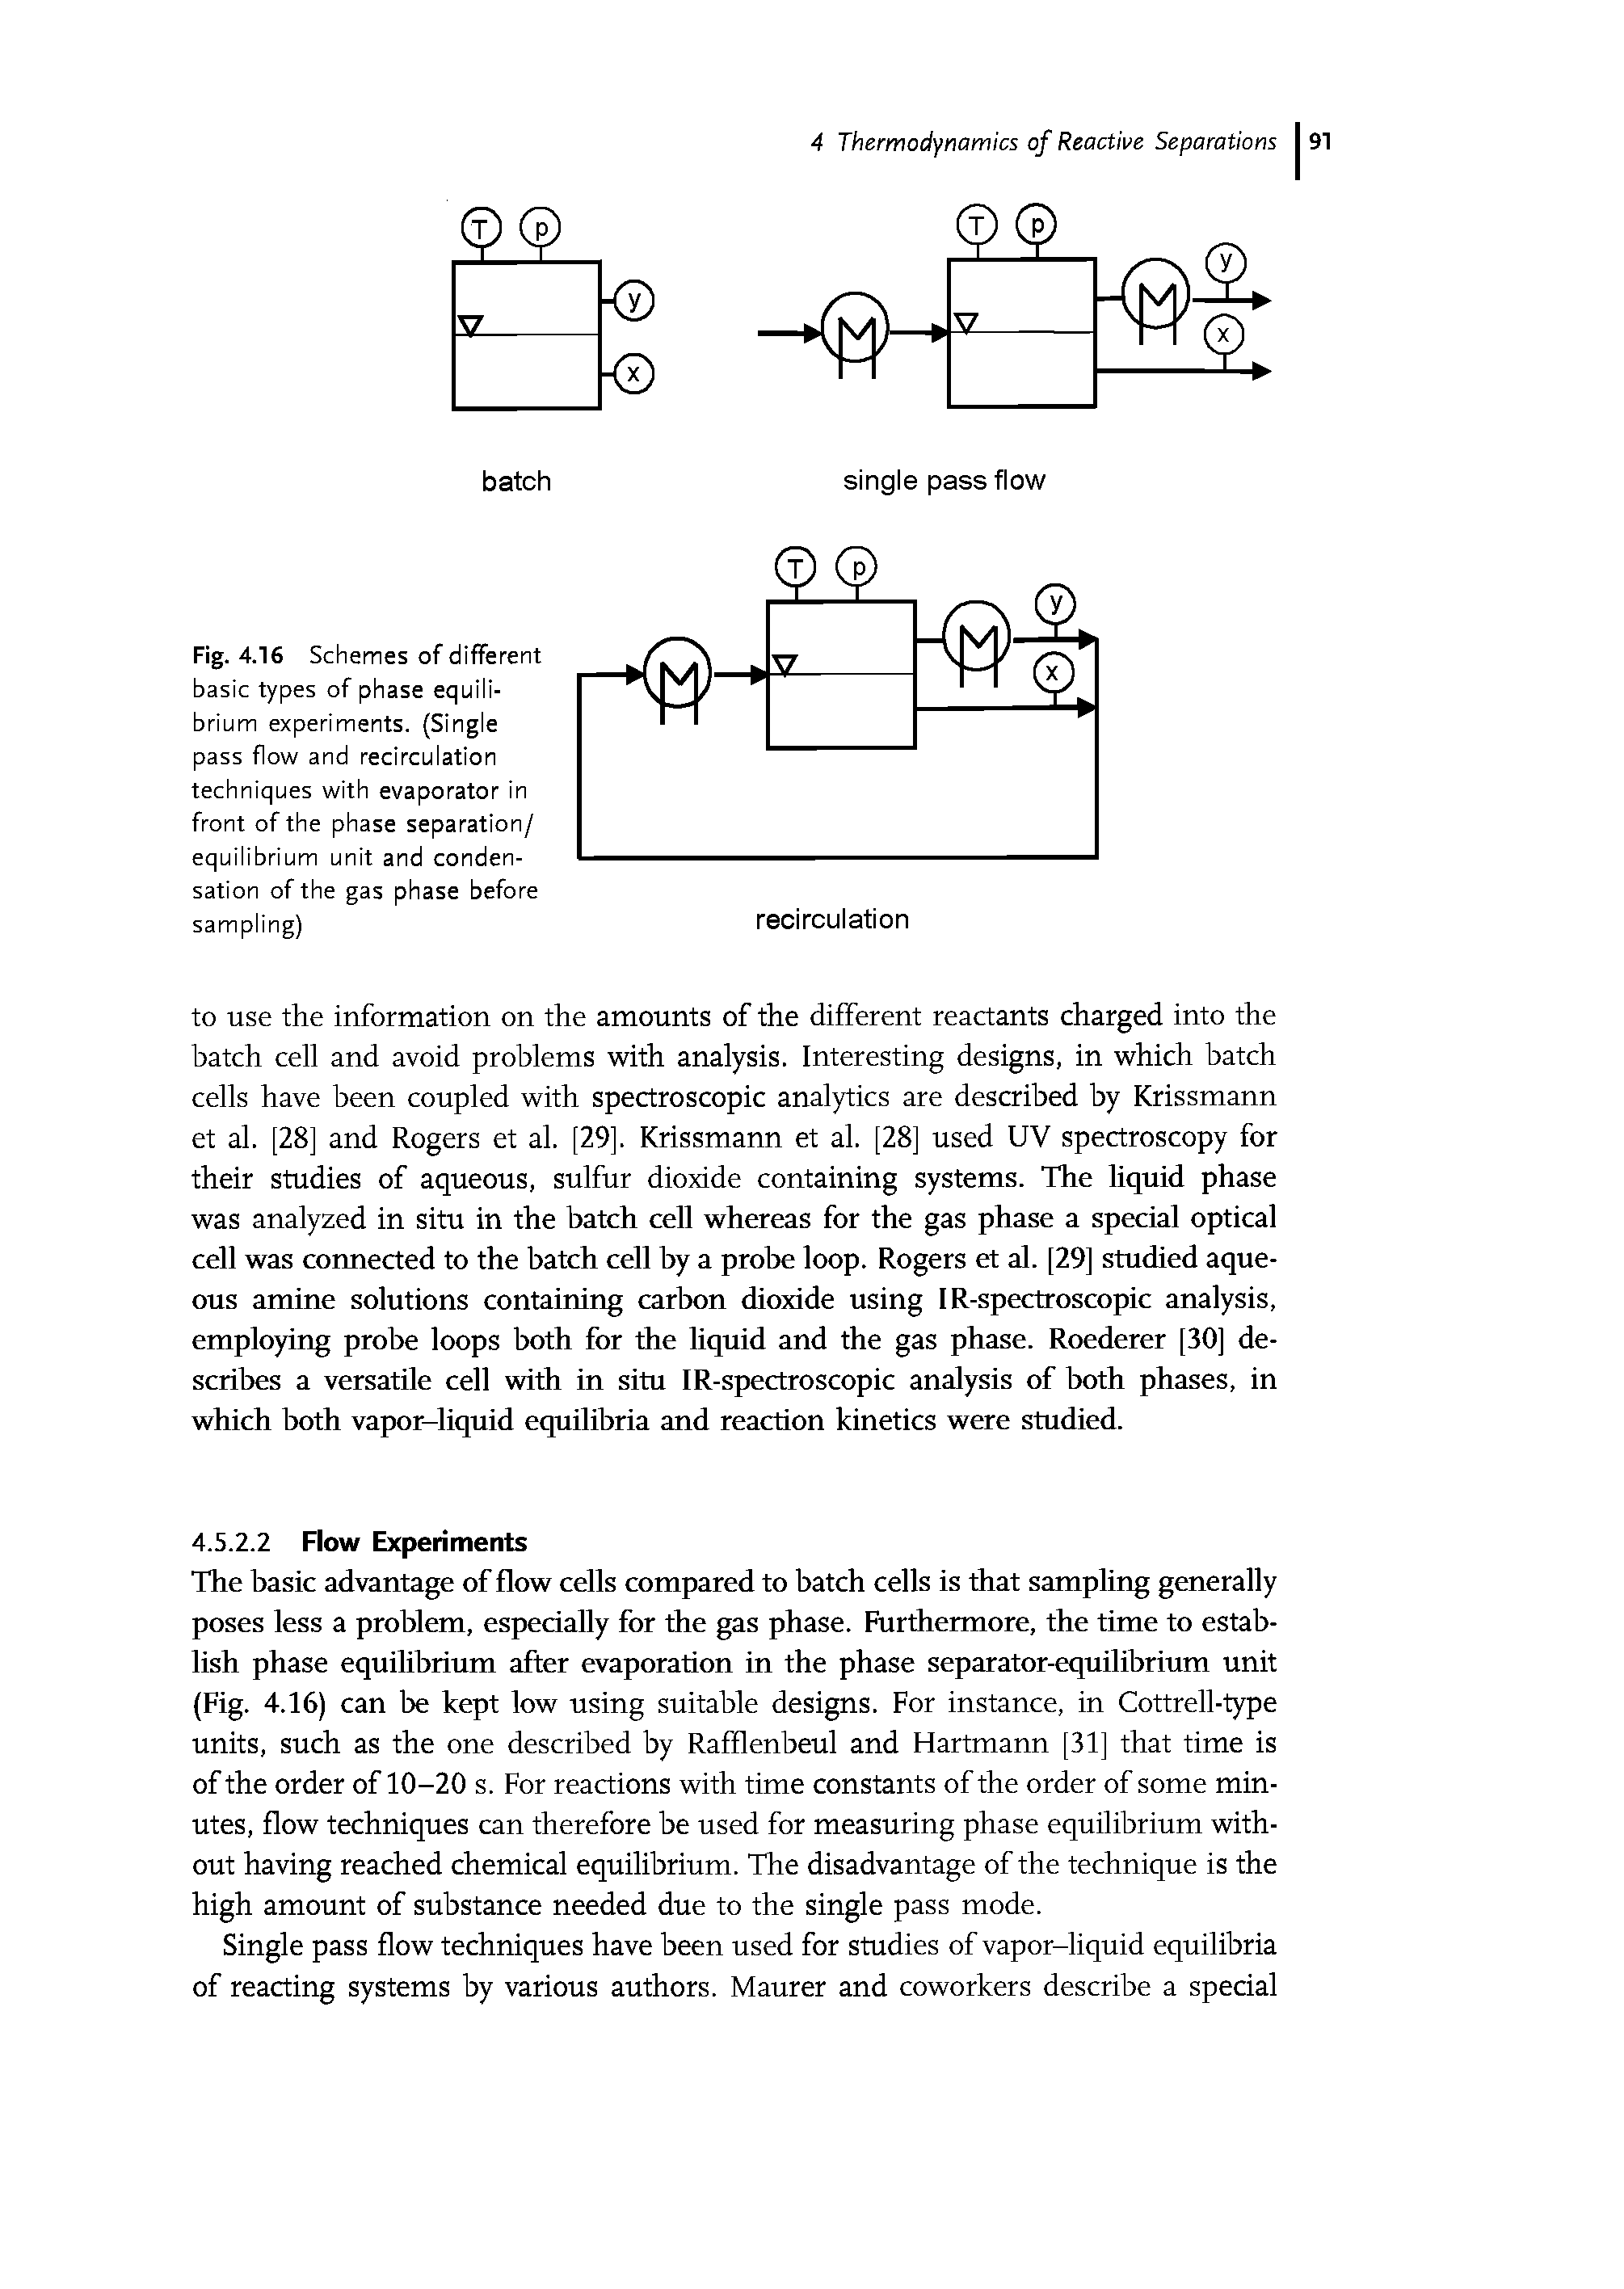 Fig. 4.16 Schemes of different basic types of phase equilibrium experiments. (Single pass flow and recirculation techniques with evaporator in front of the phase separation/ equilibrium unit and condensation of the gas phase before sampling)...